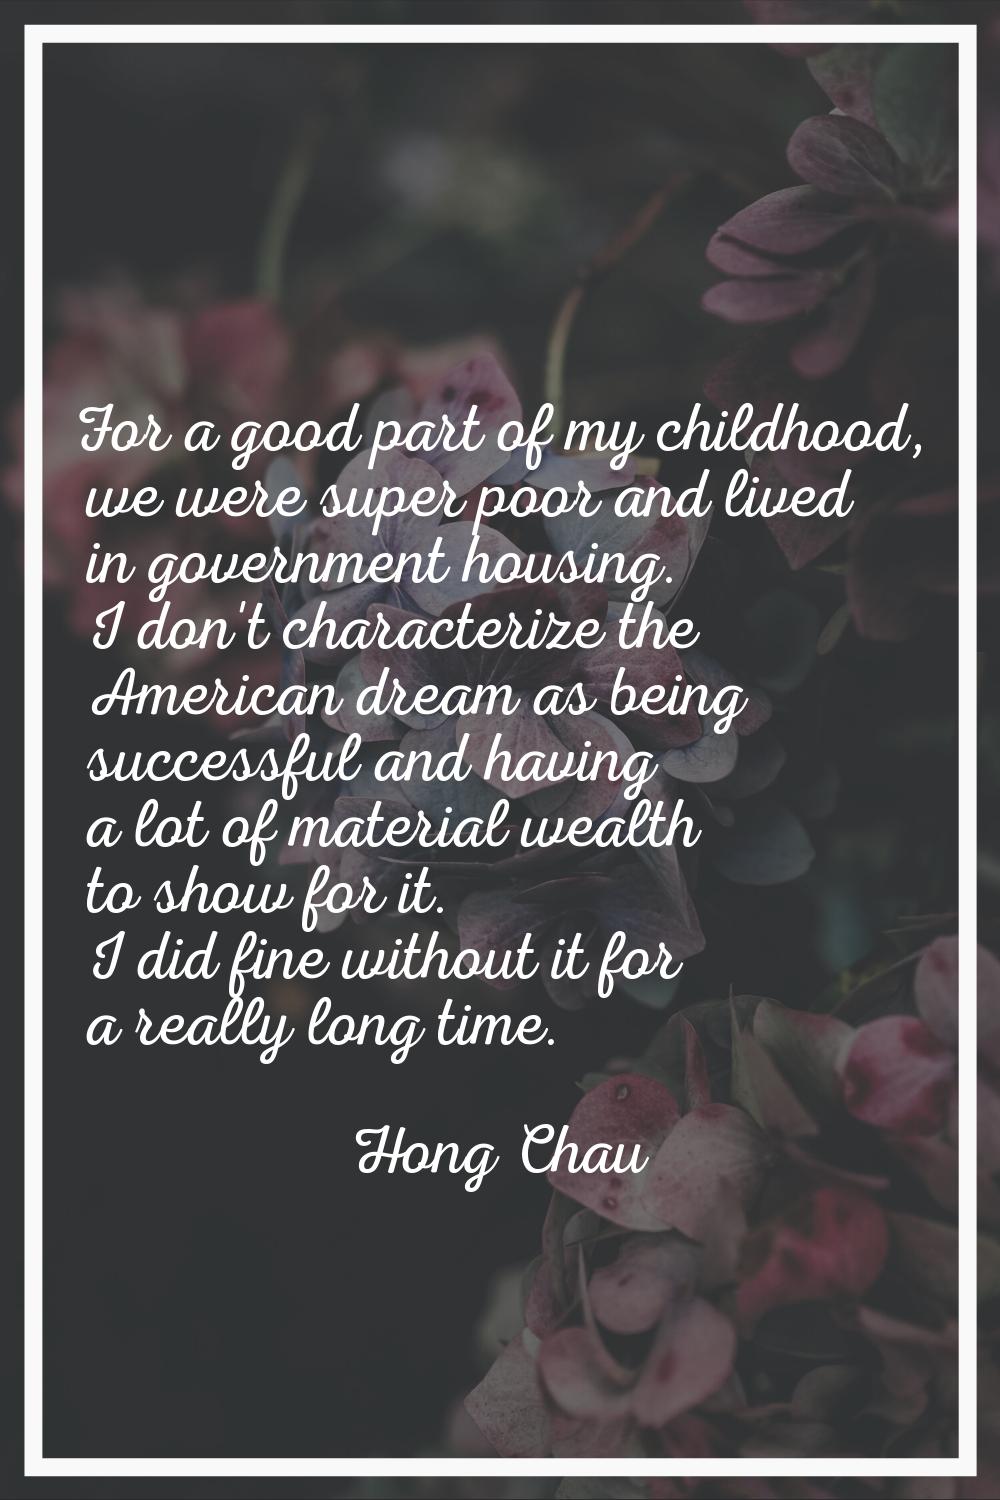 For a good part of my childhood, we were super poor and lived in government housing. I don't charac